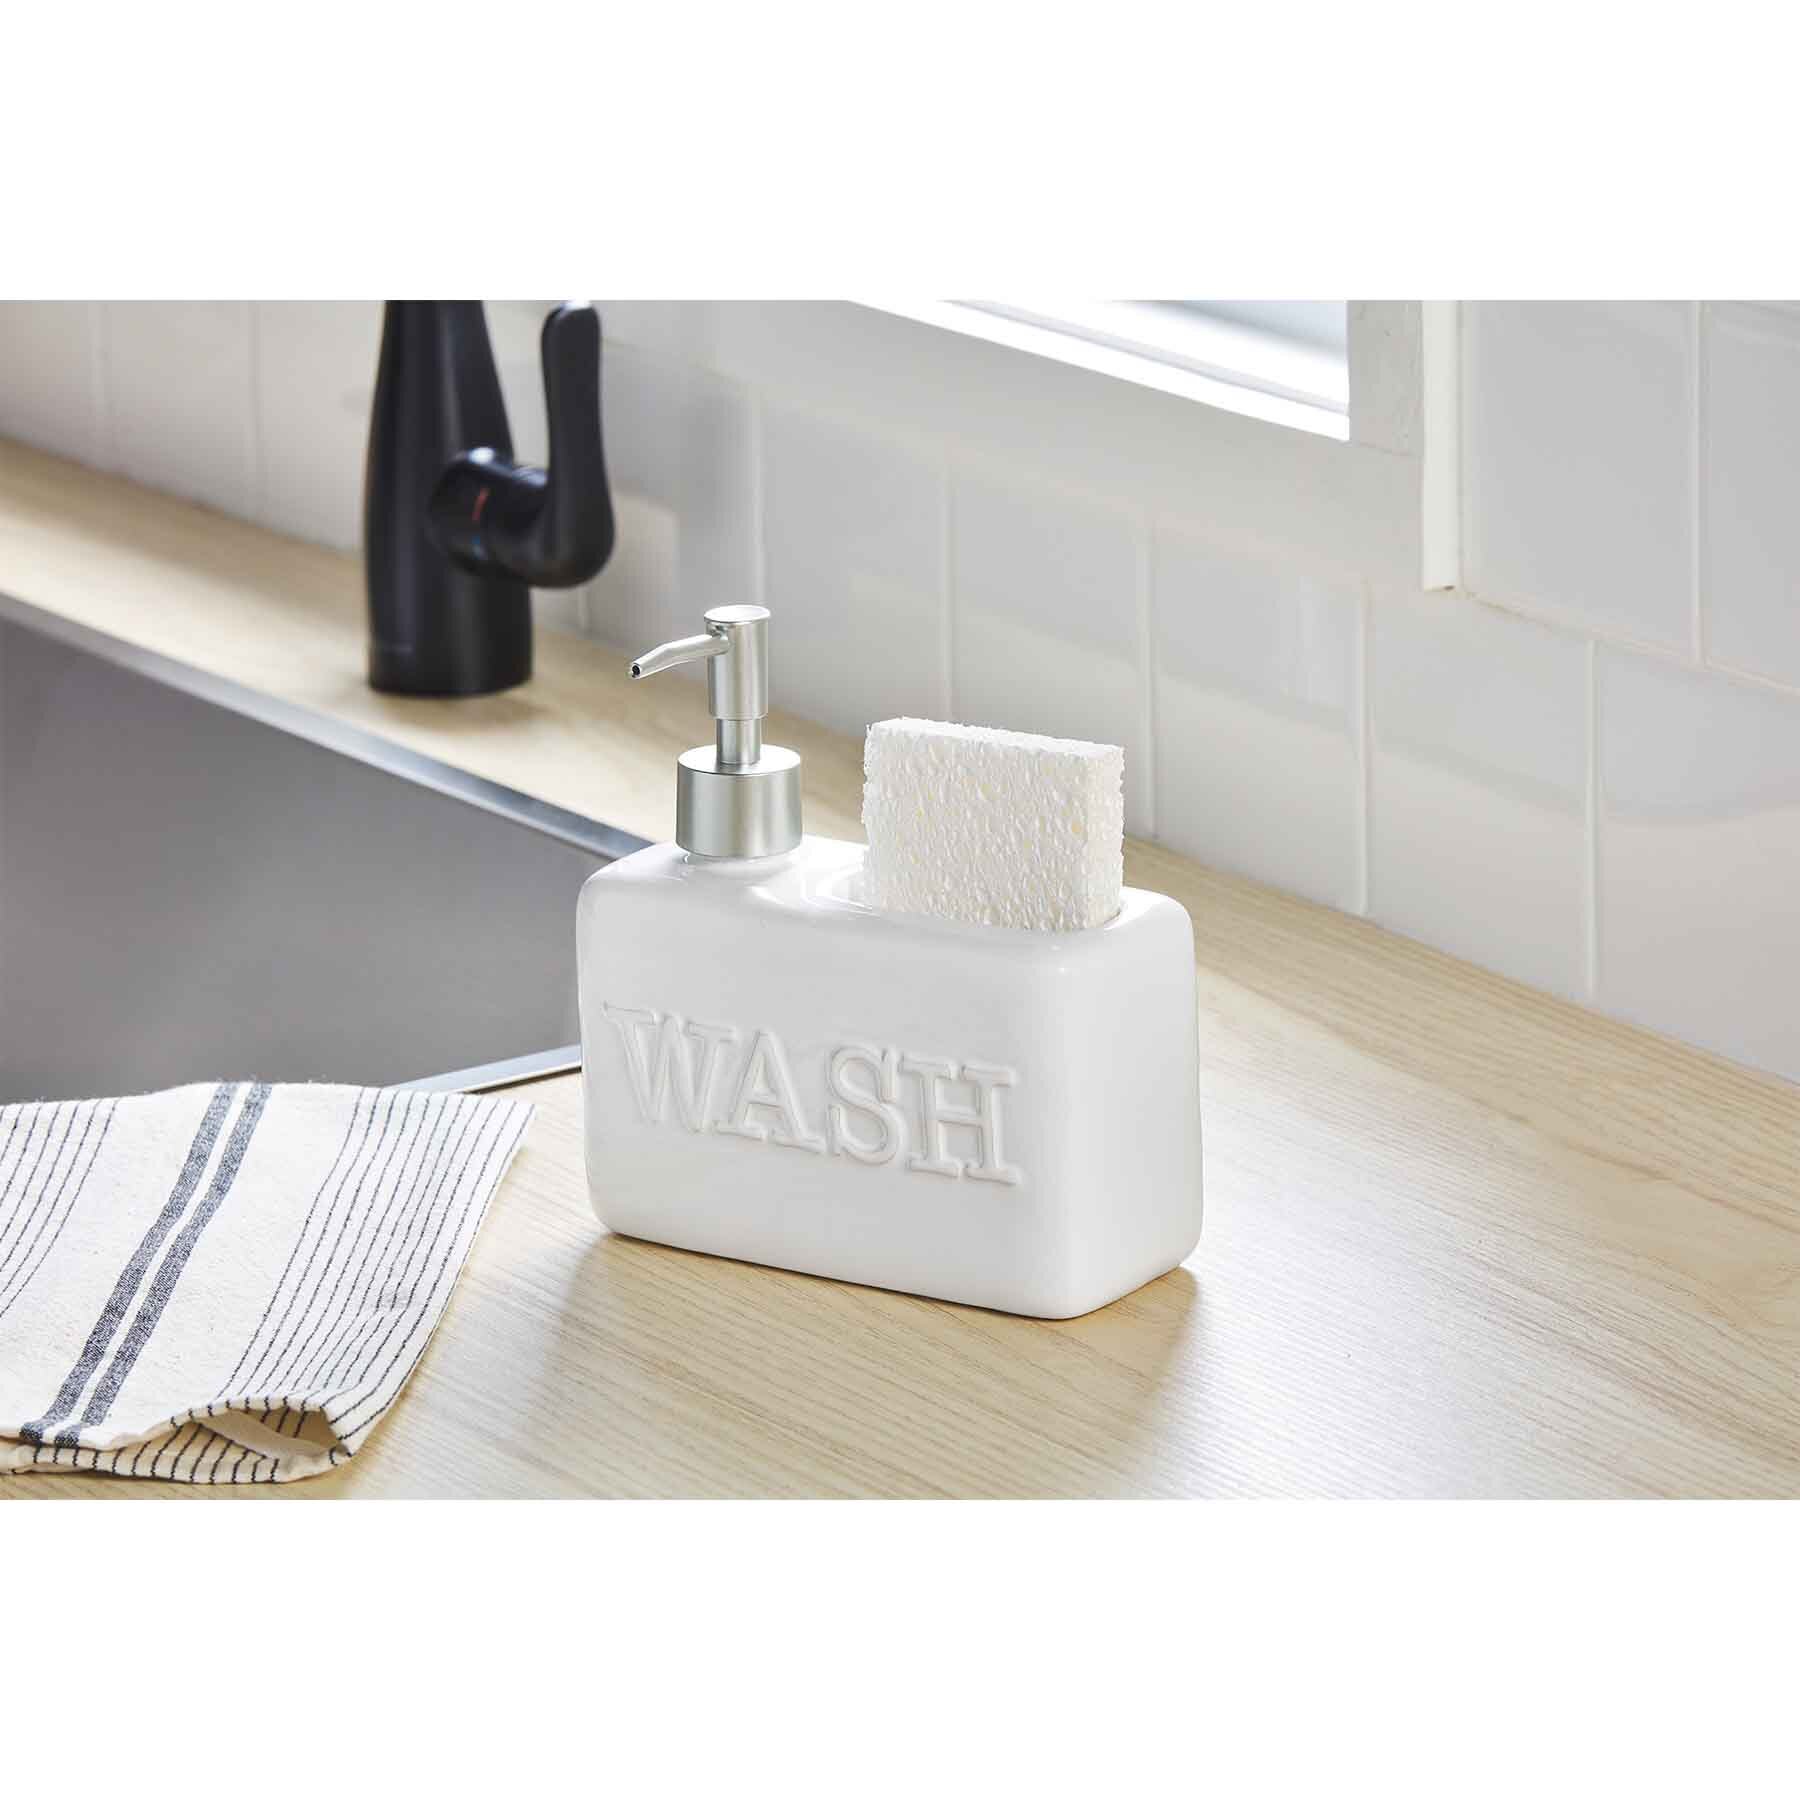 Kitchen Soap Dispenser and Sponge Holder Small Wood Tray With